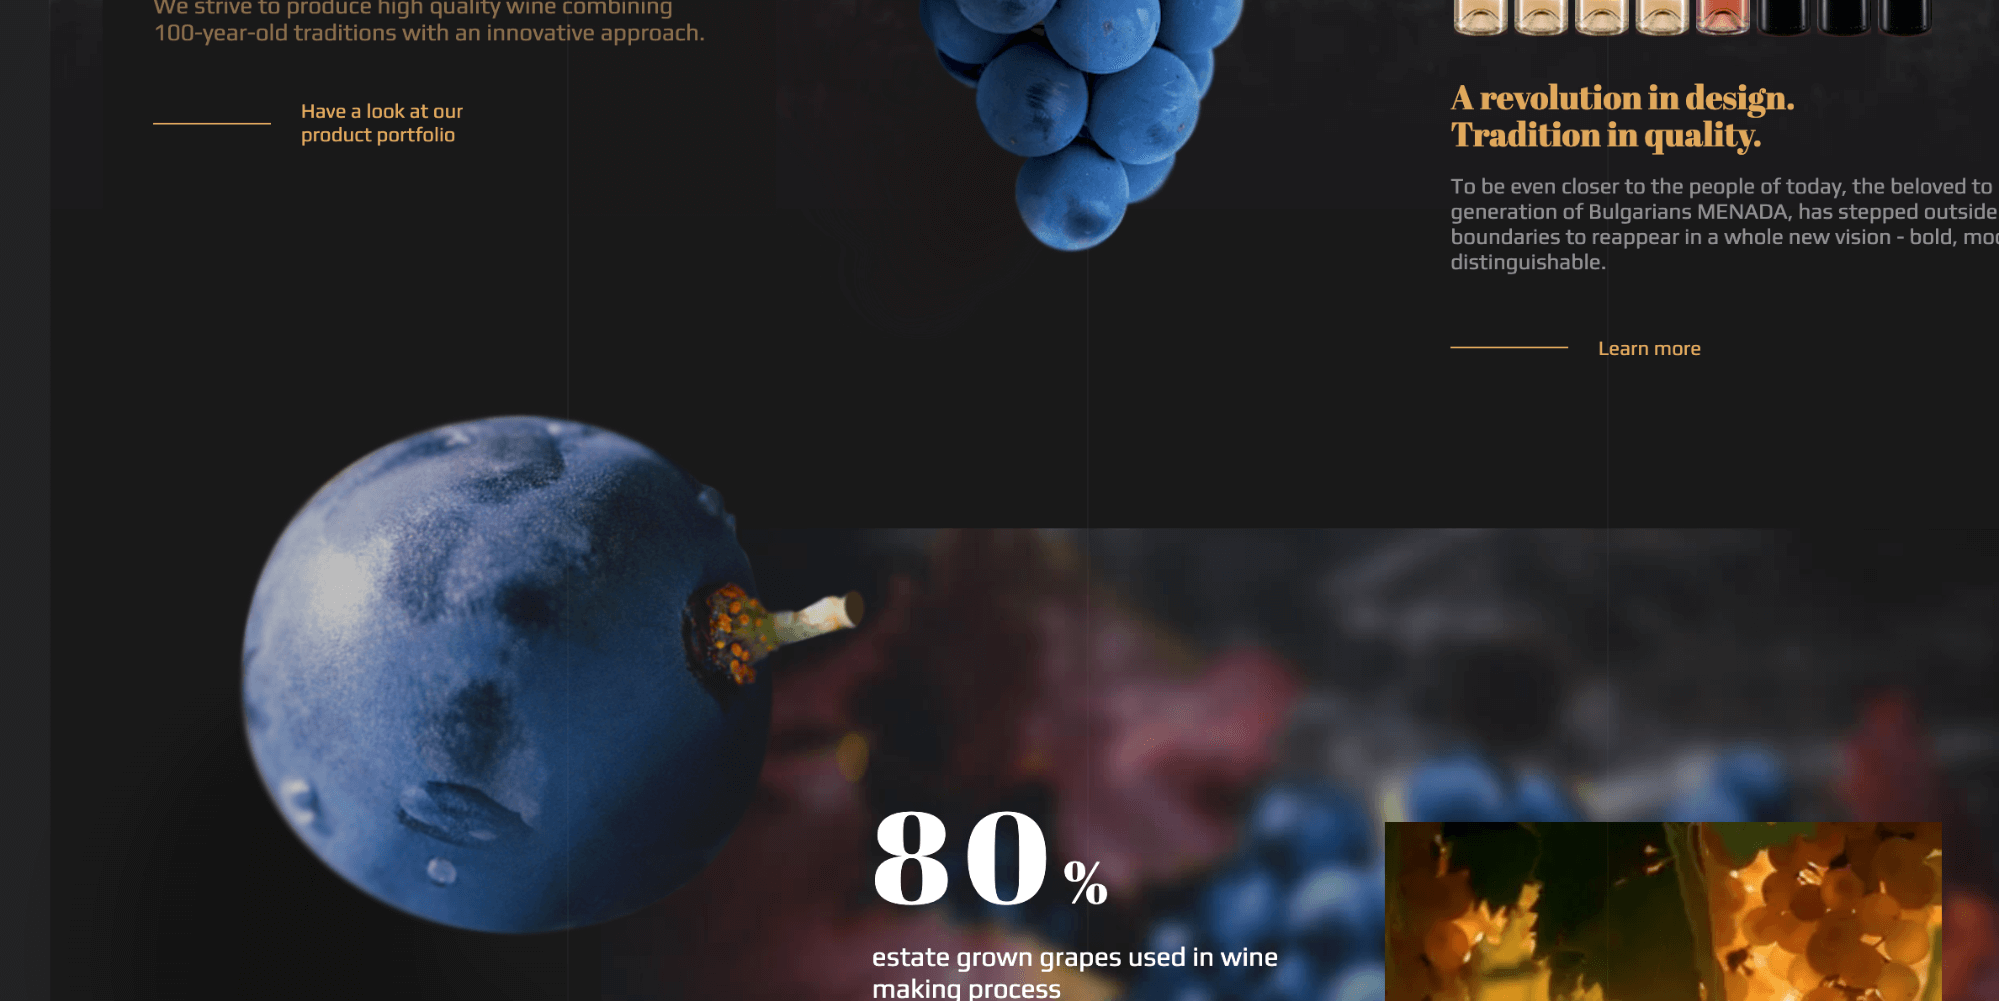 Menada Winery high-quality 3D images